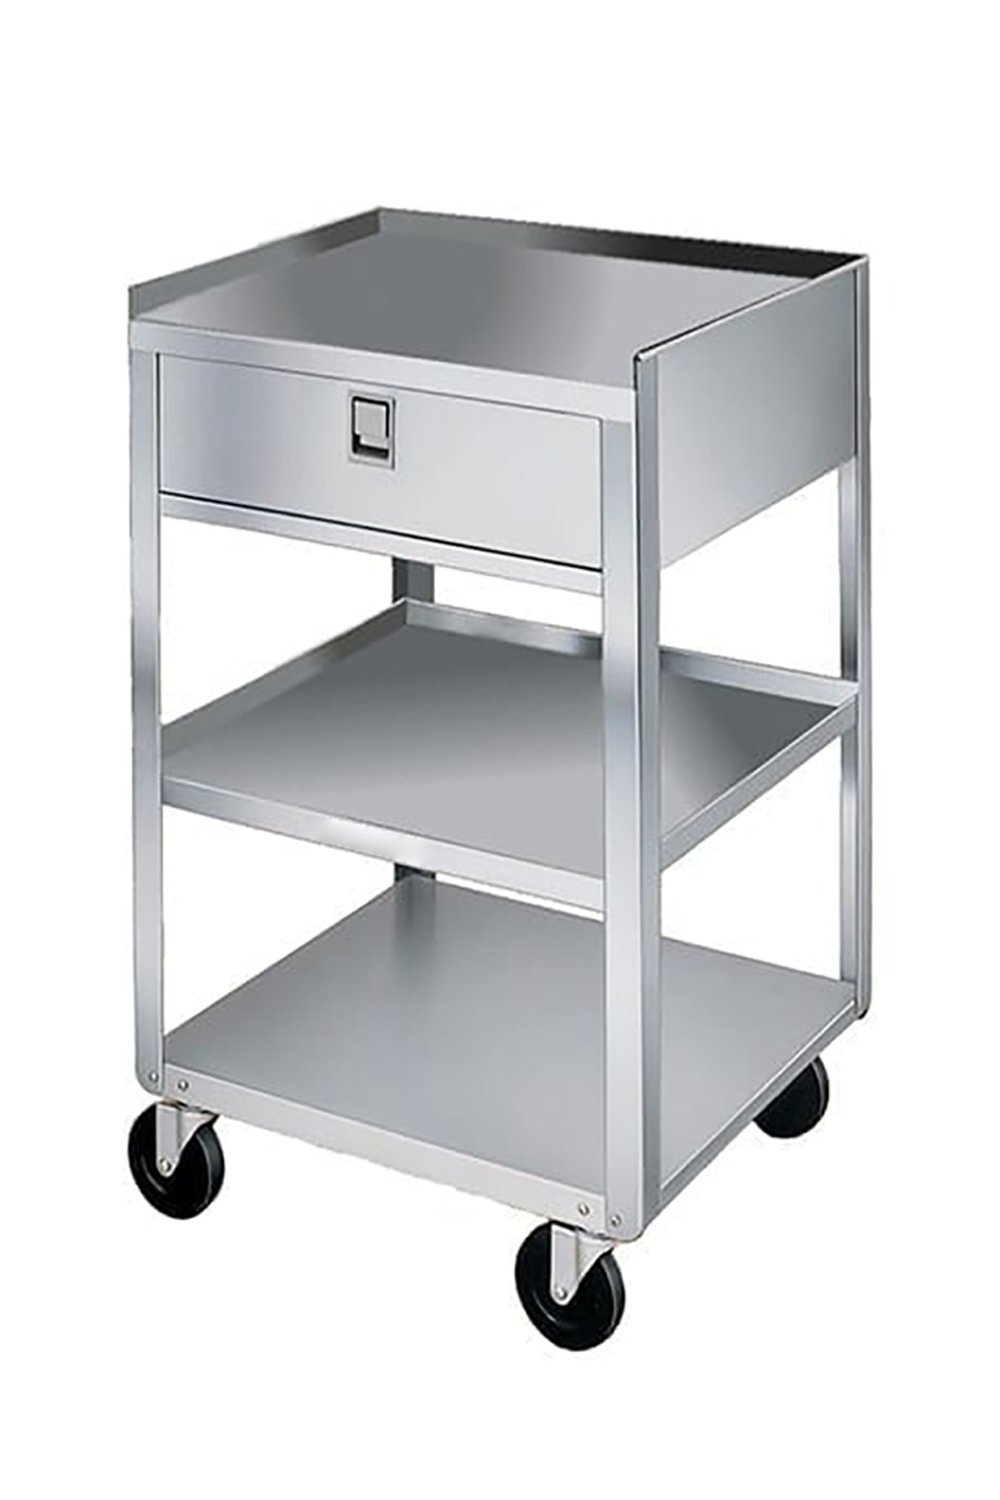 Stainless Steel Equipment/Utility Stand Stainless Solutions Lakeside 